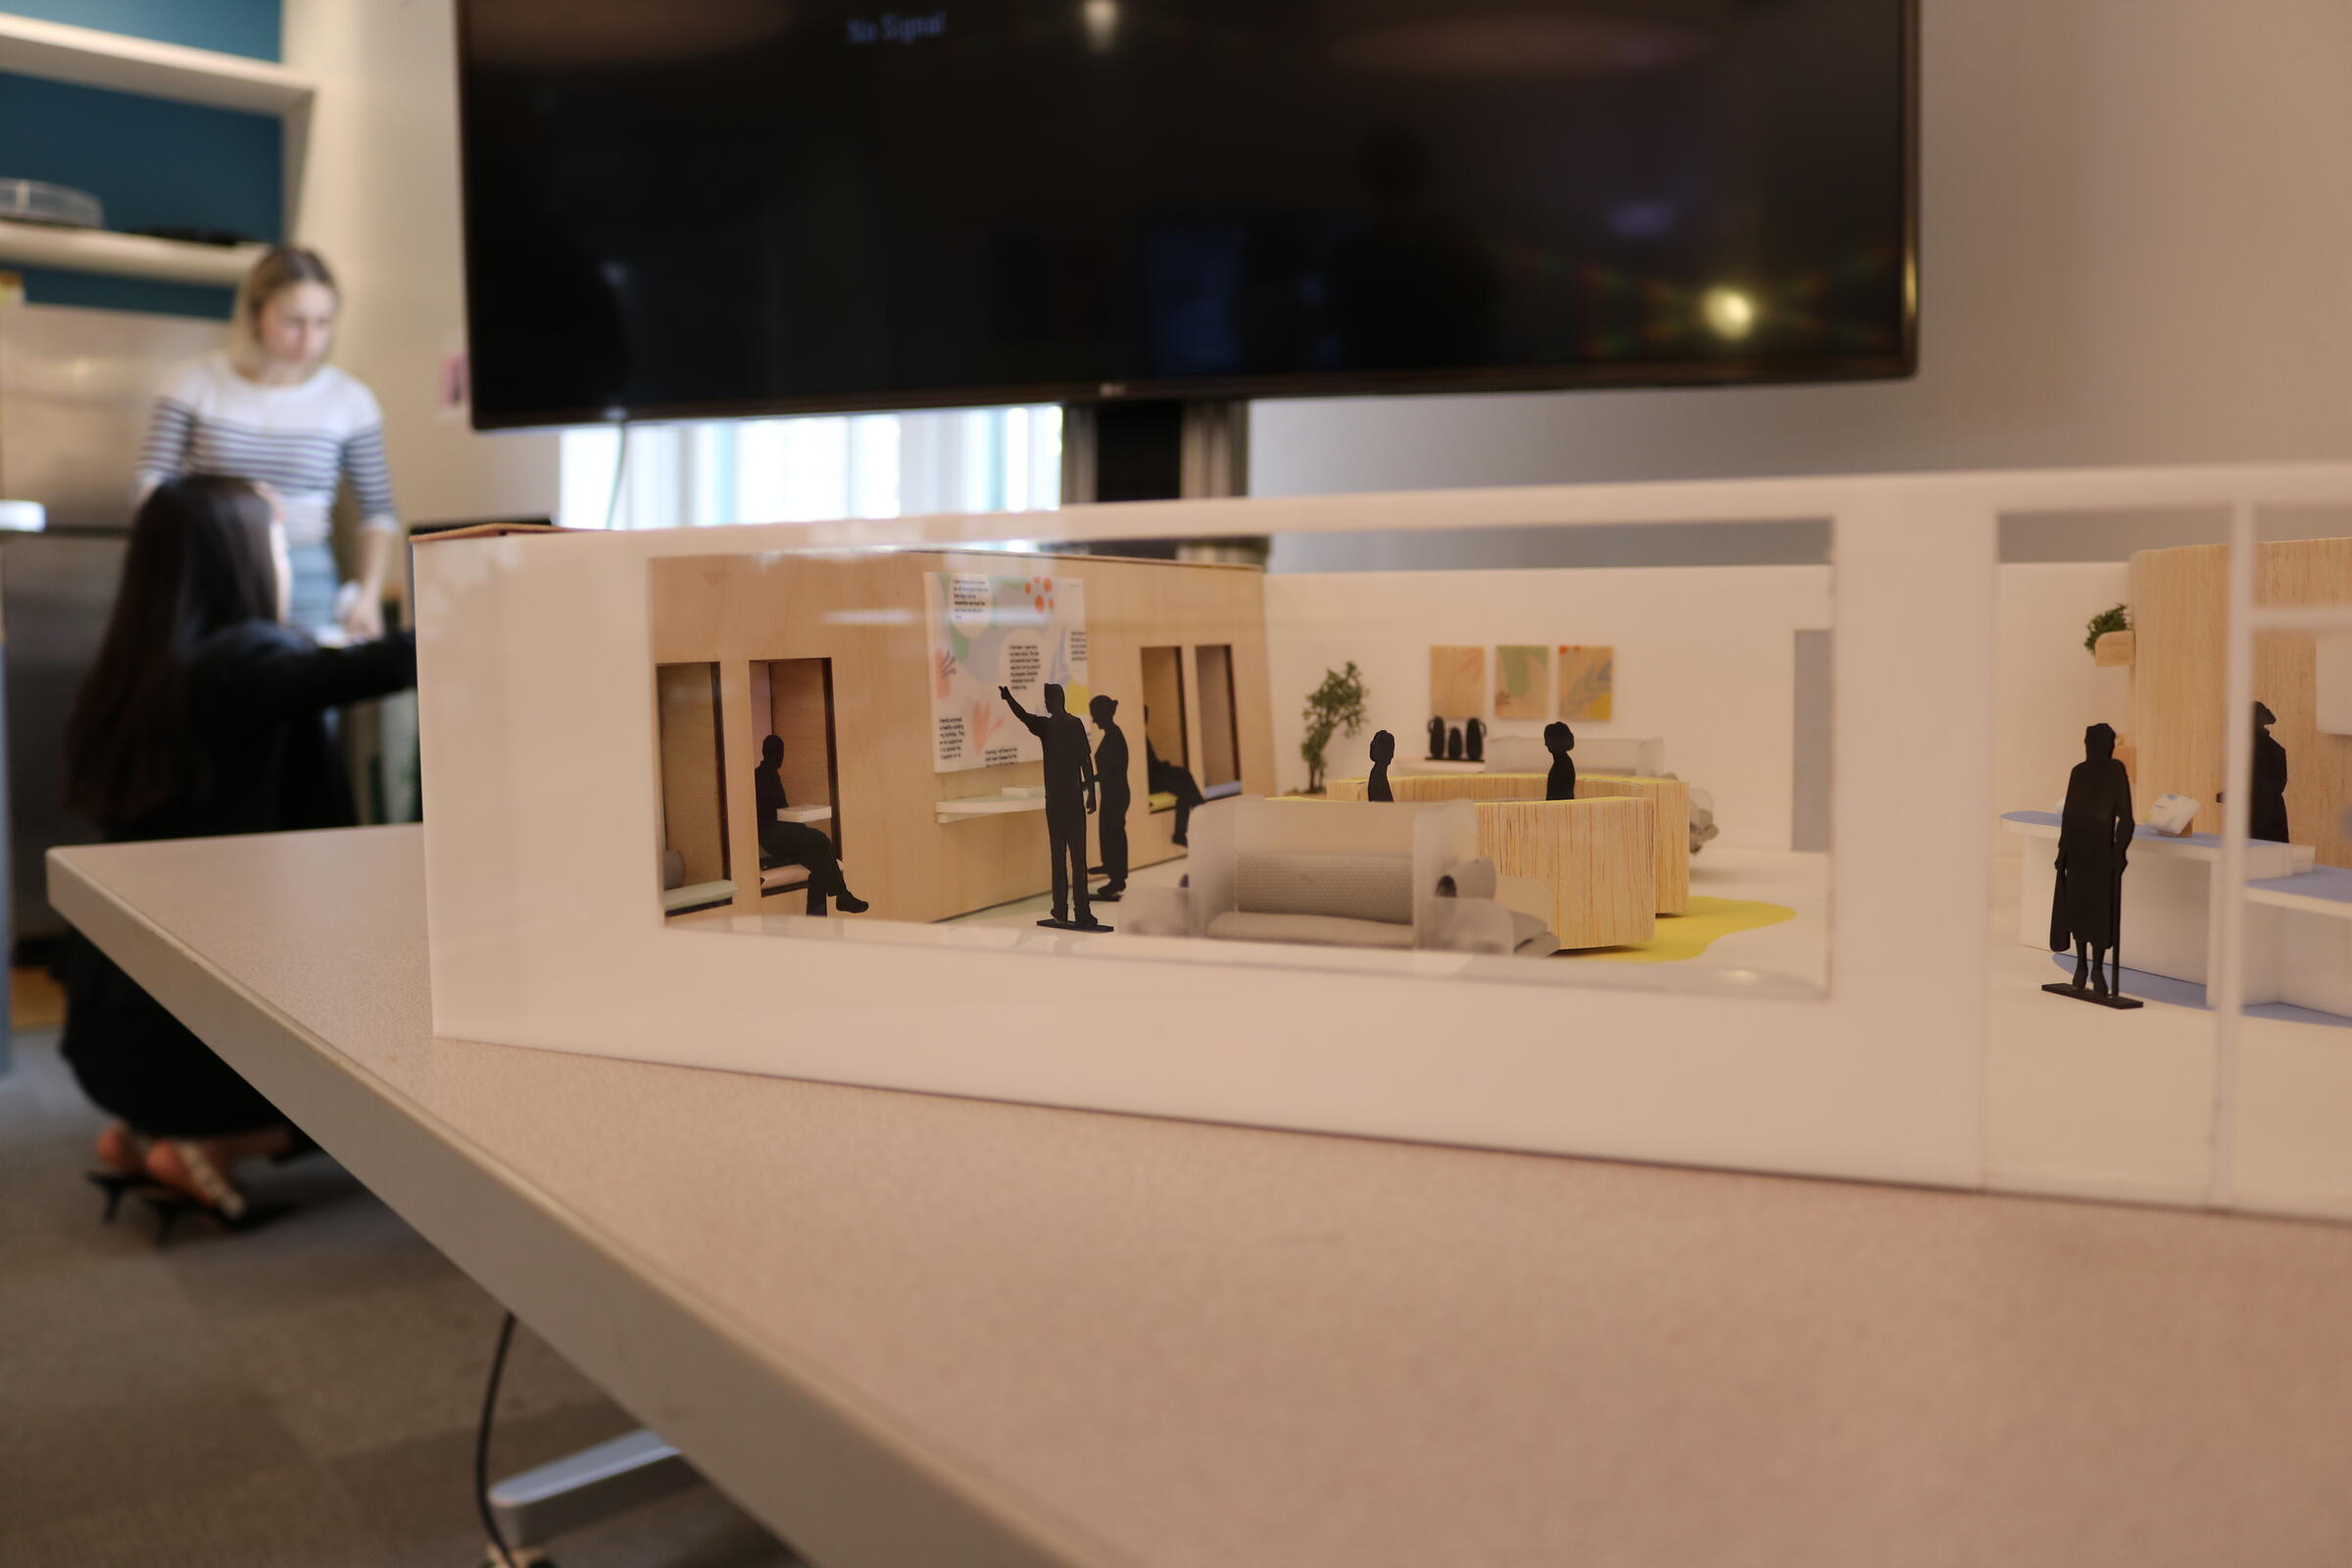 A small scale model of a retail space